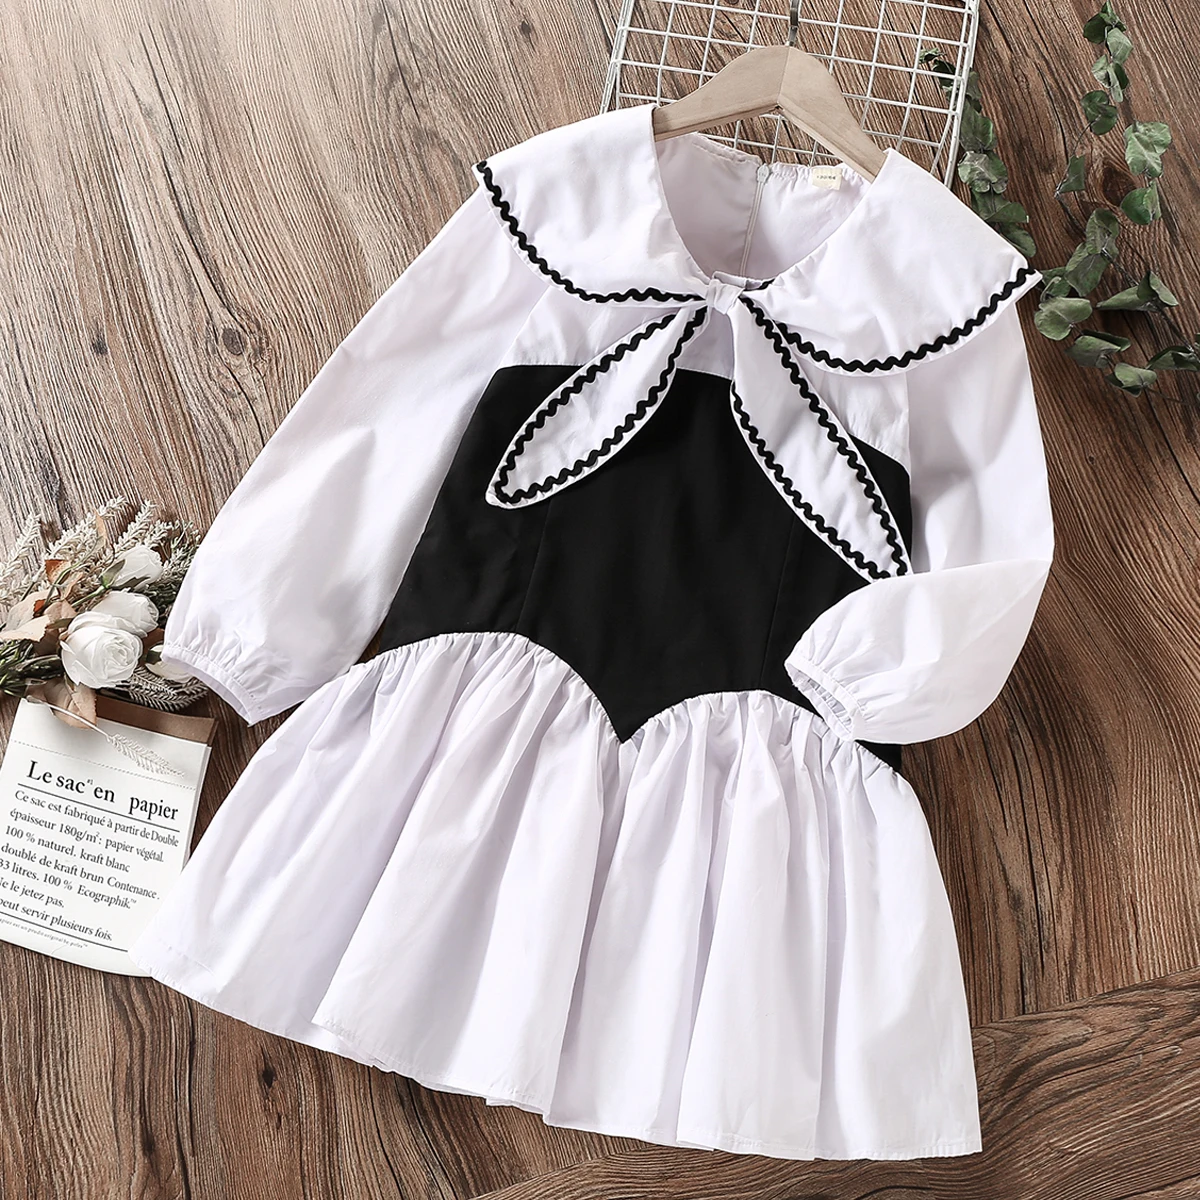 School Kids Dresses for Girls Clothes for Teenagers Pacthwork Long Sleeve Spring Autumn Children Baby Costumes 6 8 9 10 12 Years